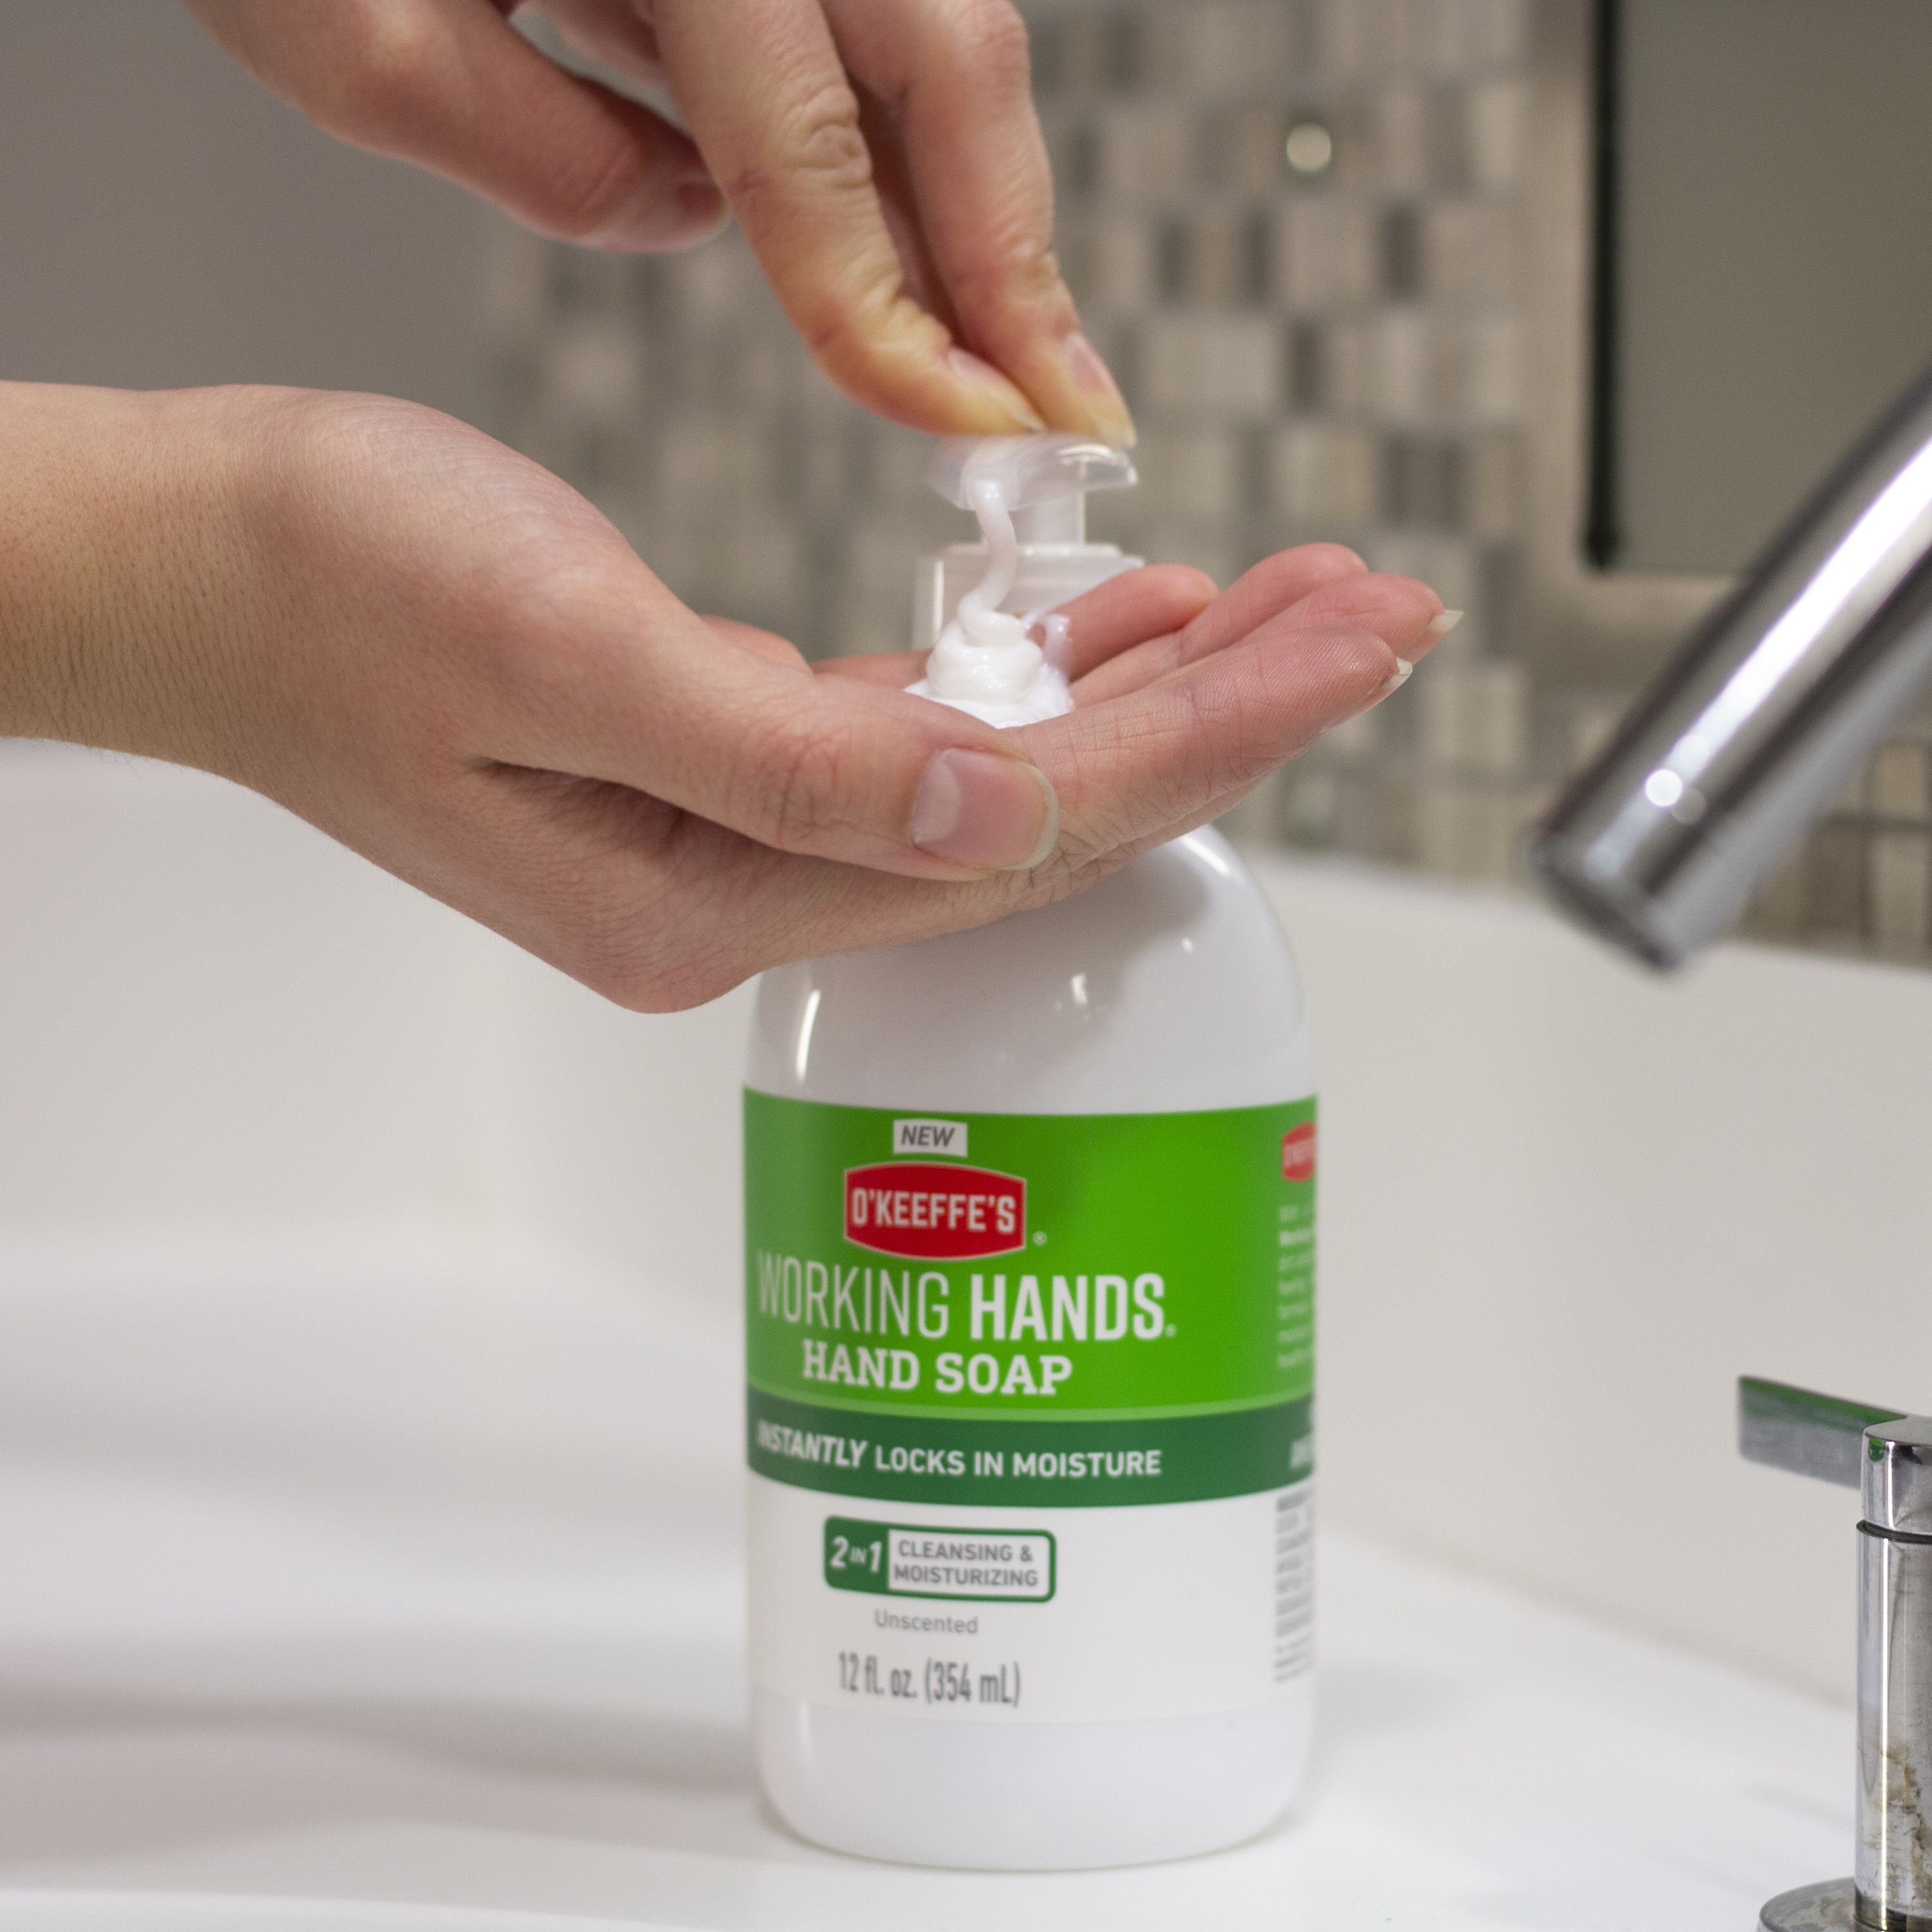 O'Keeffe's Working Hands Moisturizing Liquid Hand Soap, Unscented, 12 fl oz (354 ml) - image 4 of 13